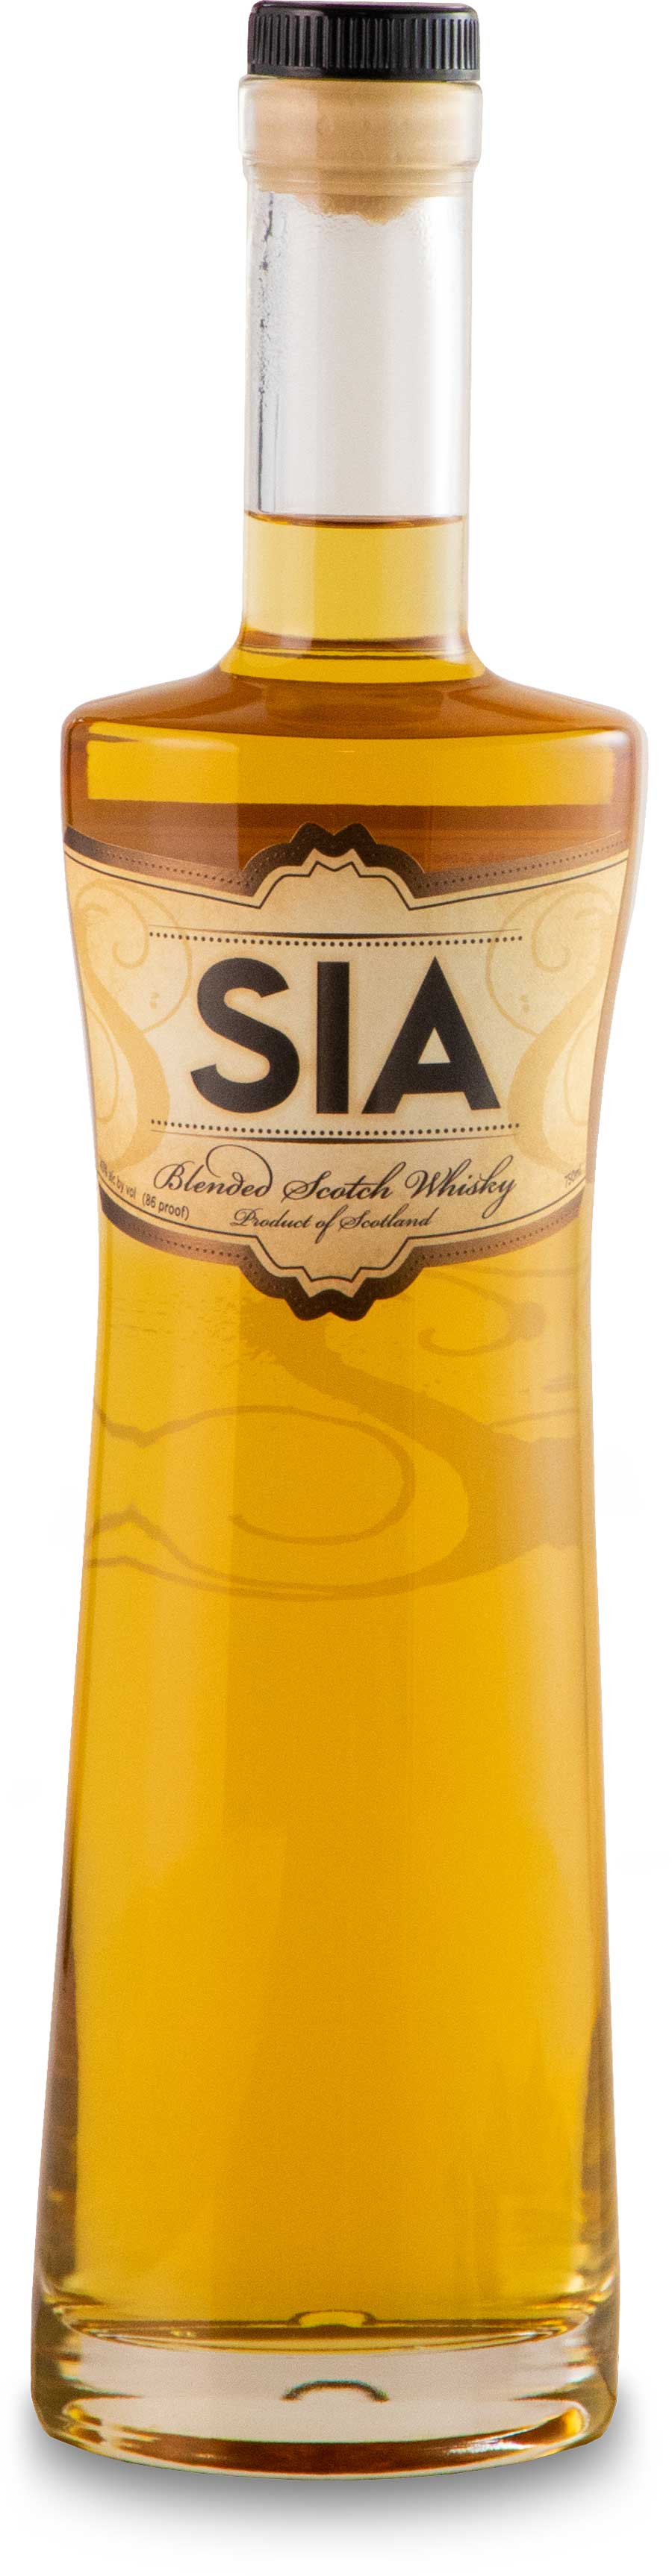 A bottle of SIA Blended Scotch Whisky